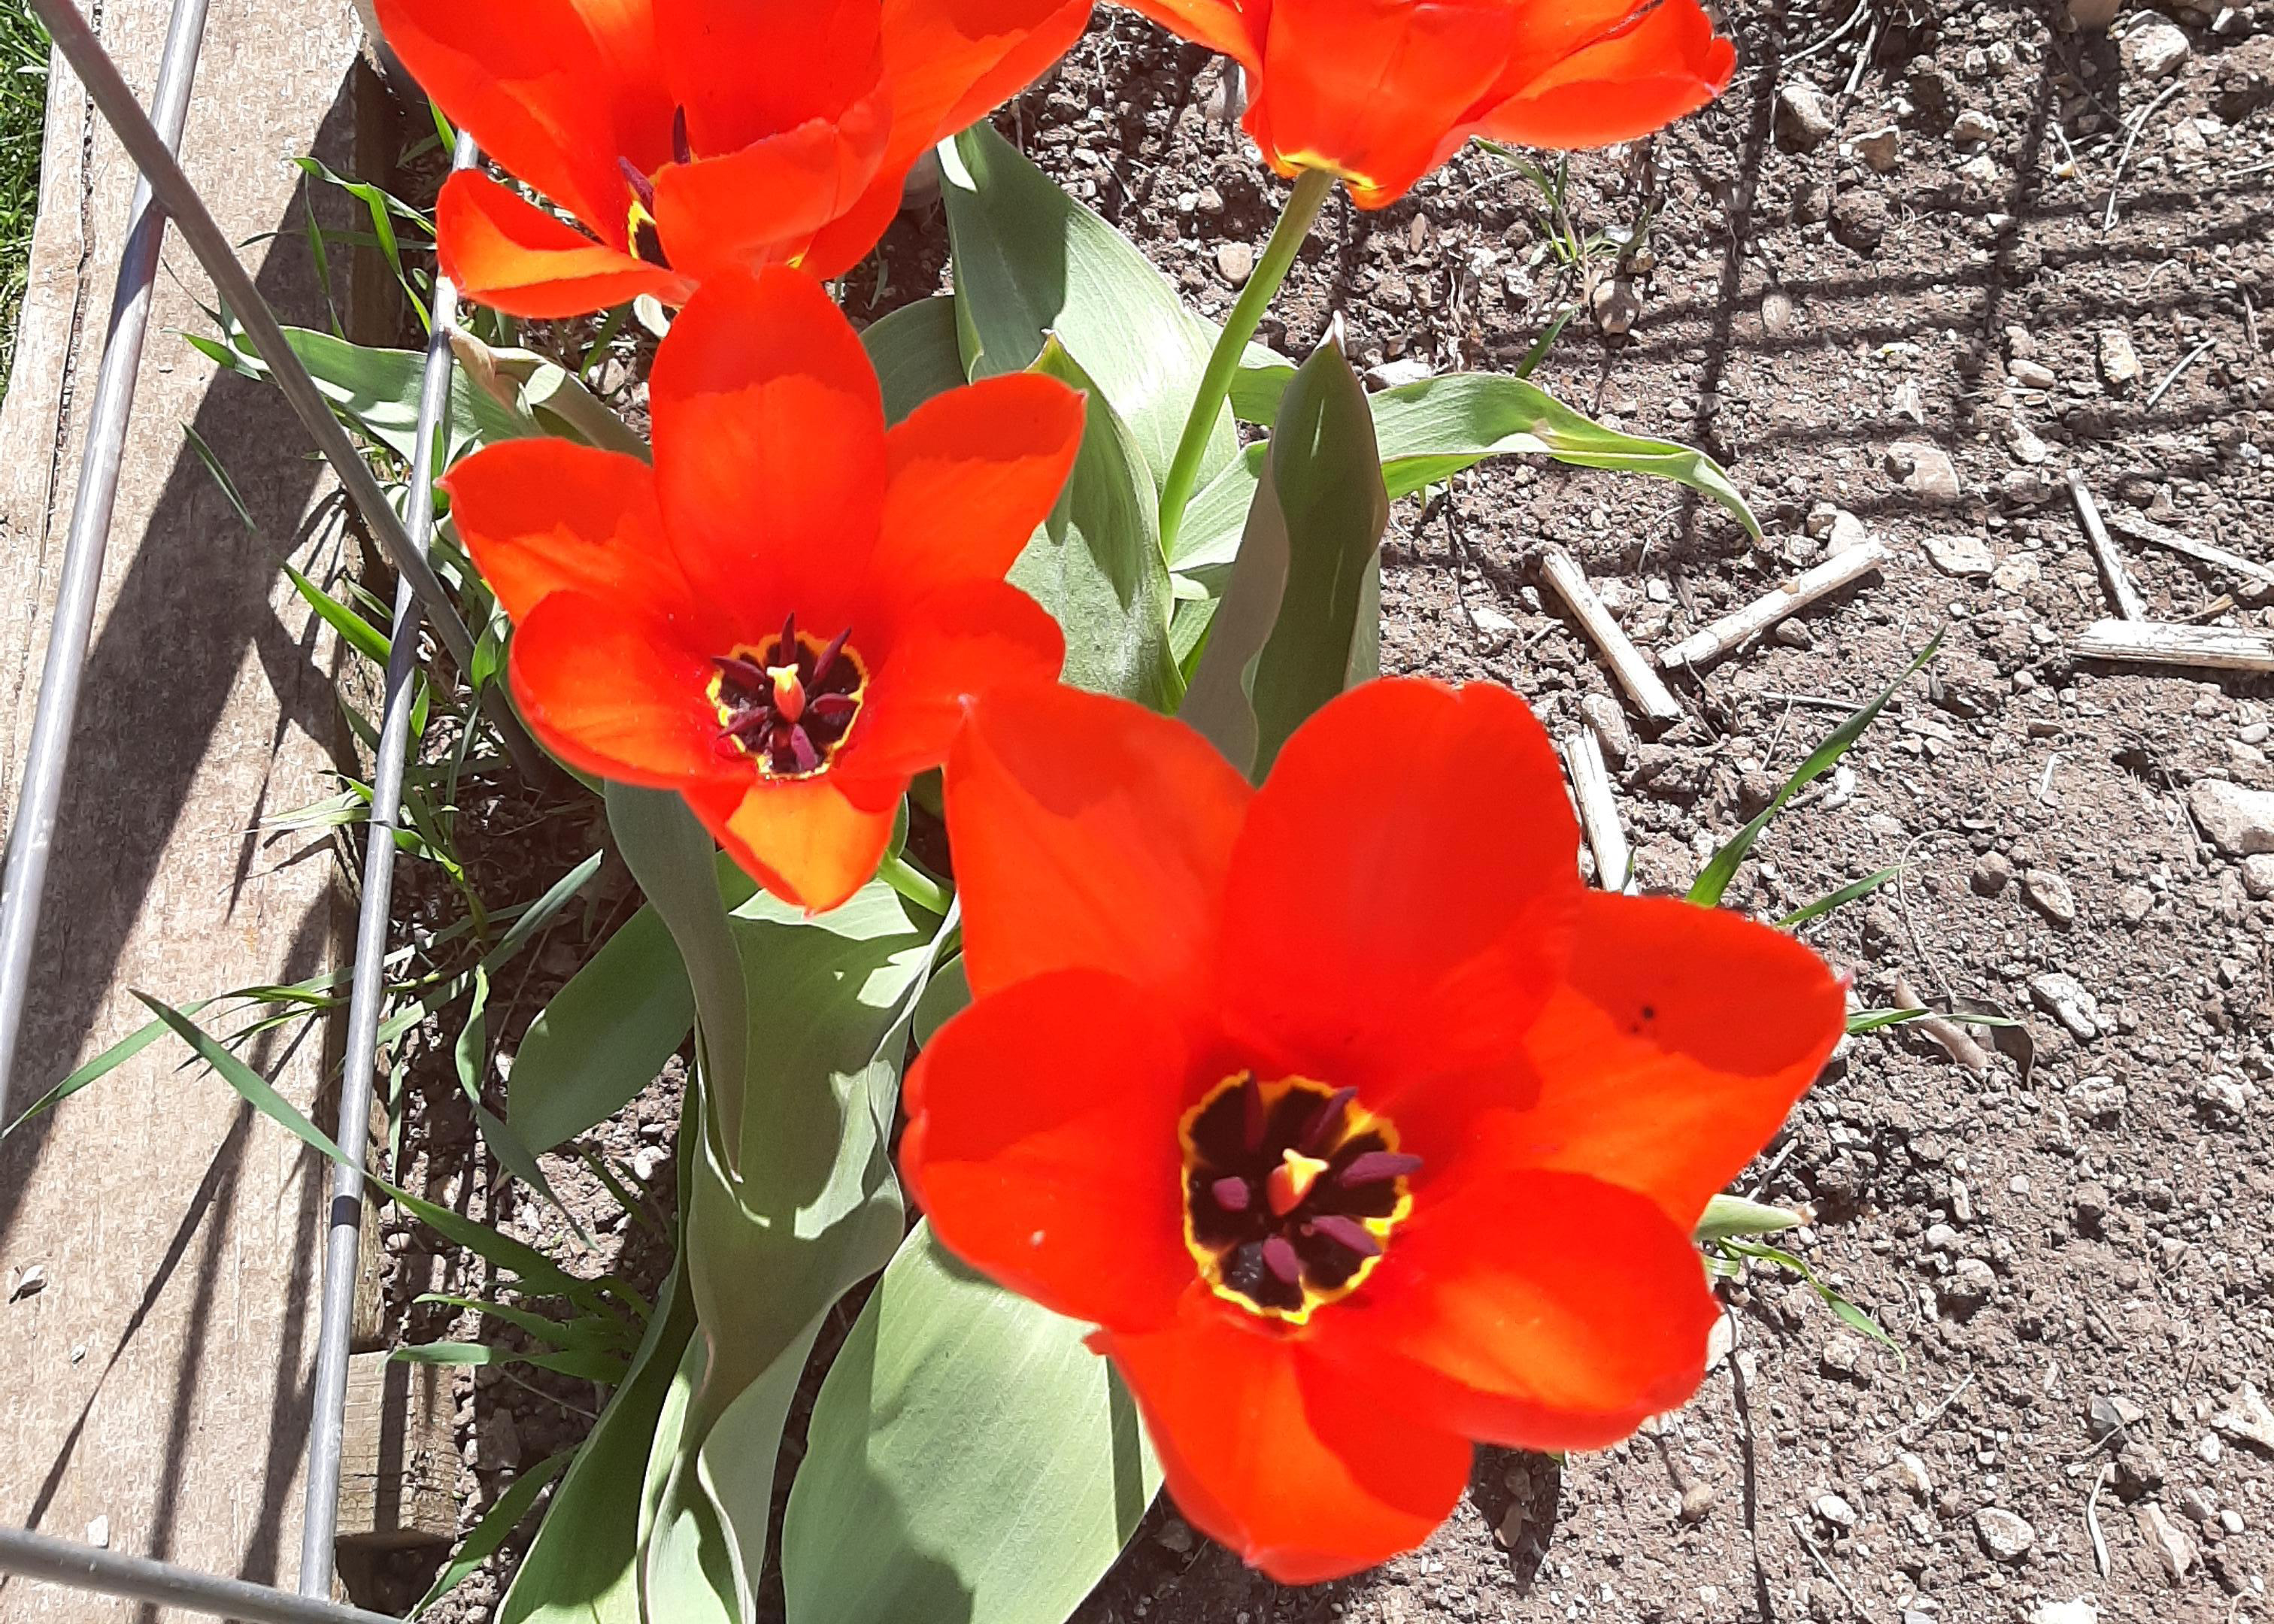 Tulips blooming in Montana.